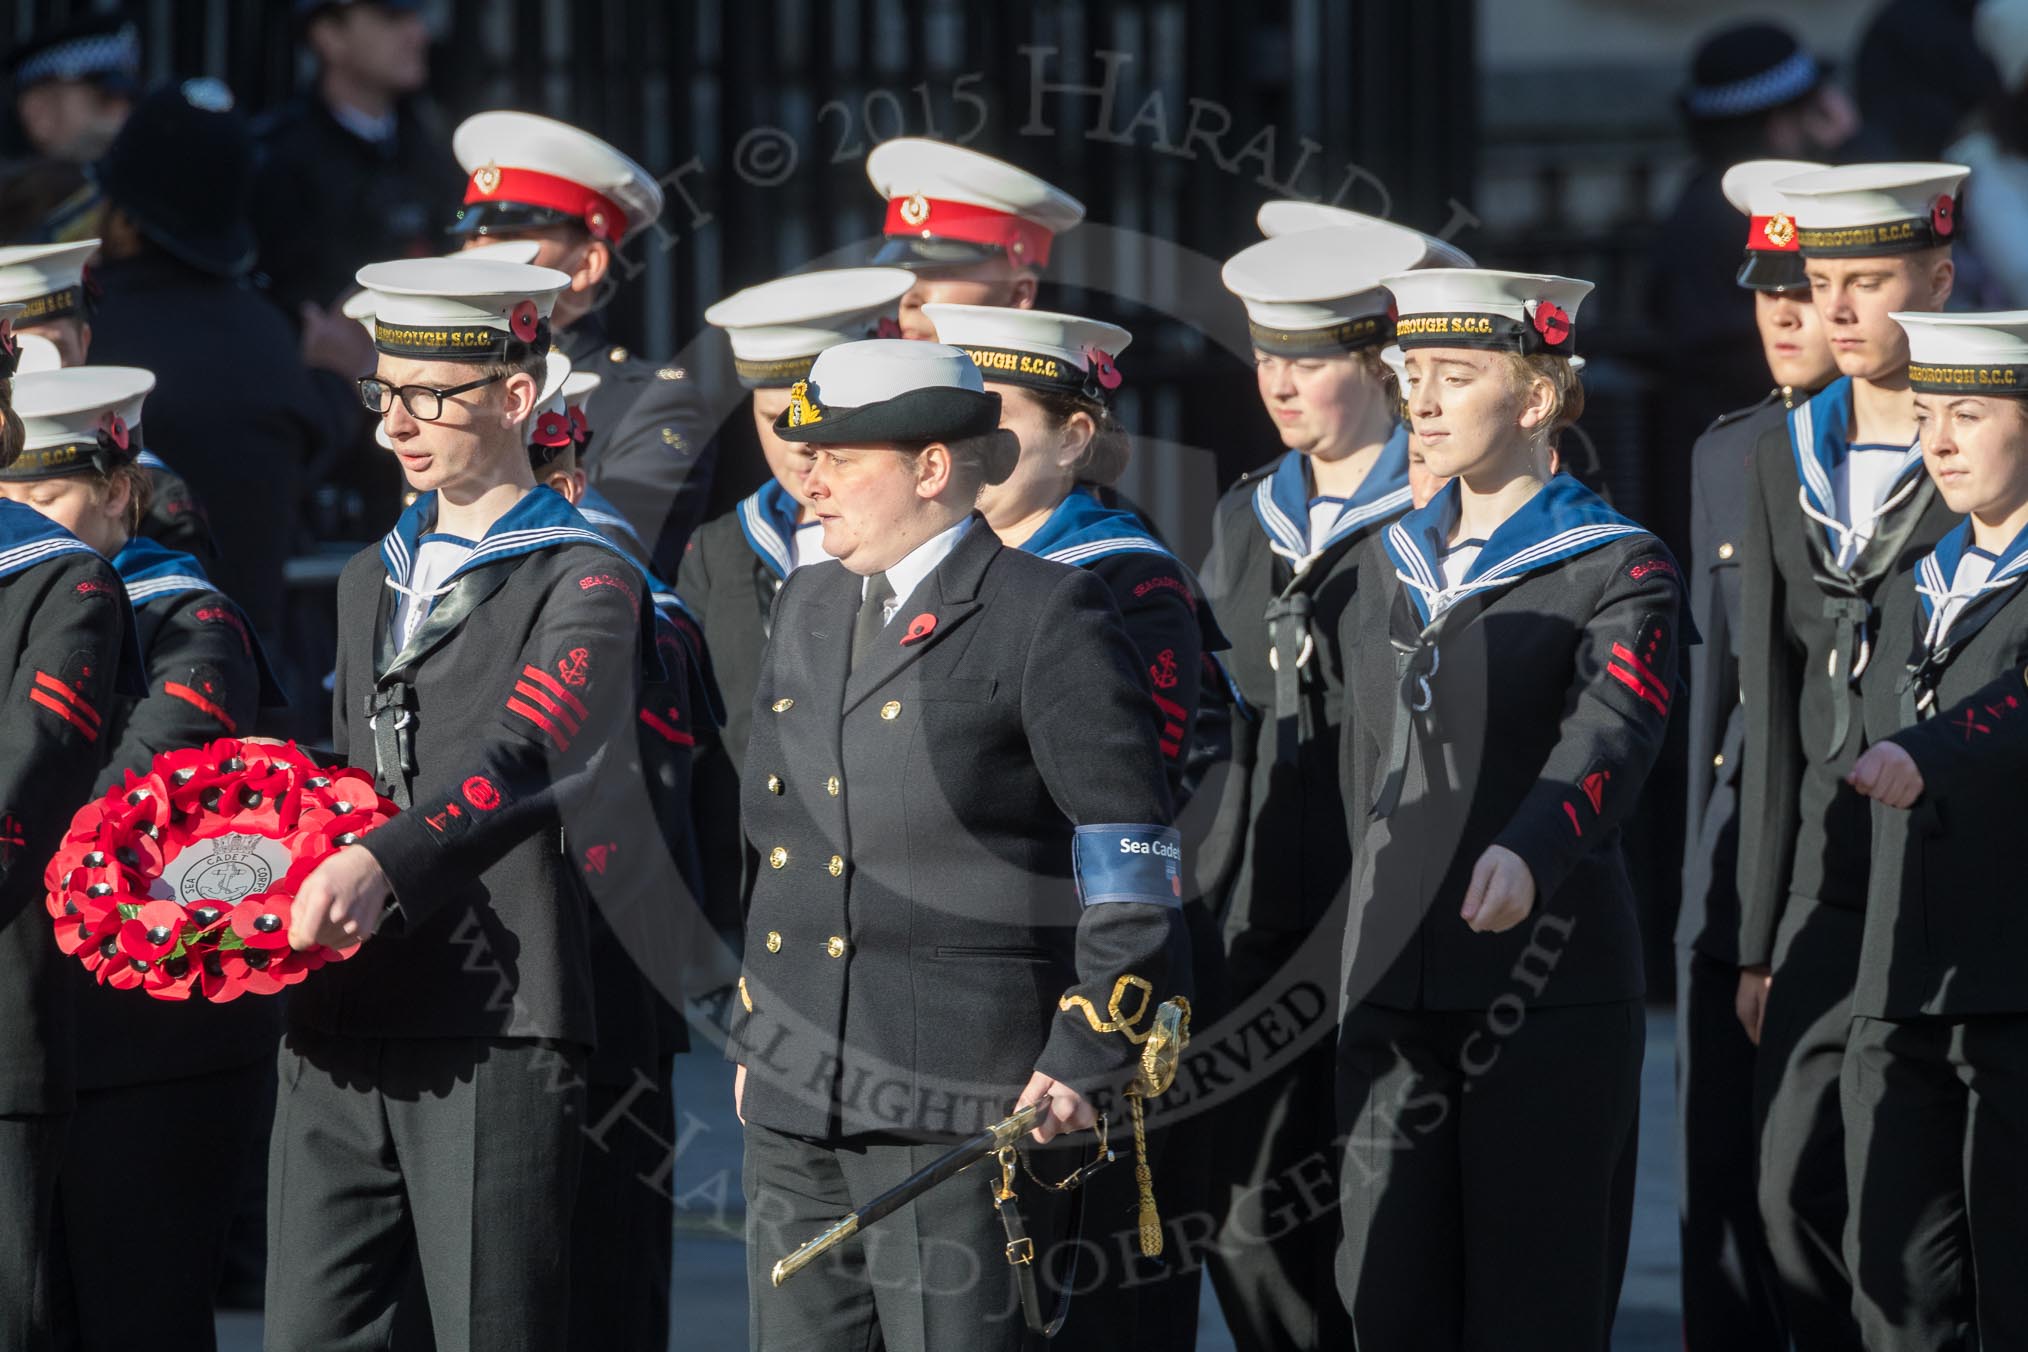 March Past, Remembrance Sunday at the Cenotaph 2016: M32 Army and combined Cadet Force.
Cenotaph, Whitehall, London SW1,
London,
Greater London,
United Kingdom,
on 13 November 2016 at 13:17, image #2791